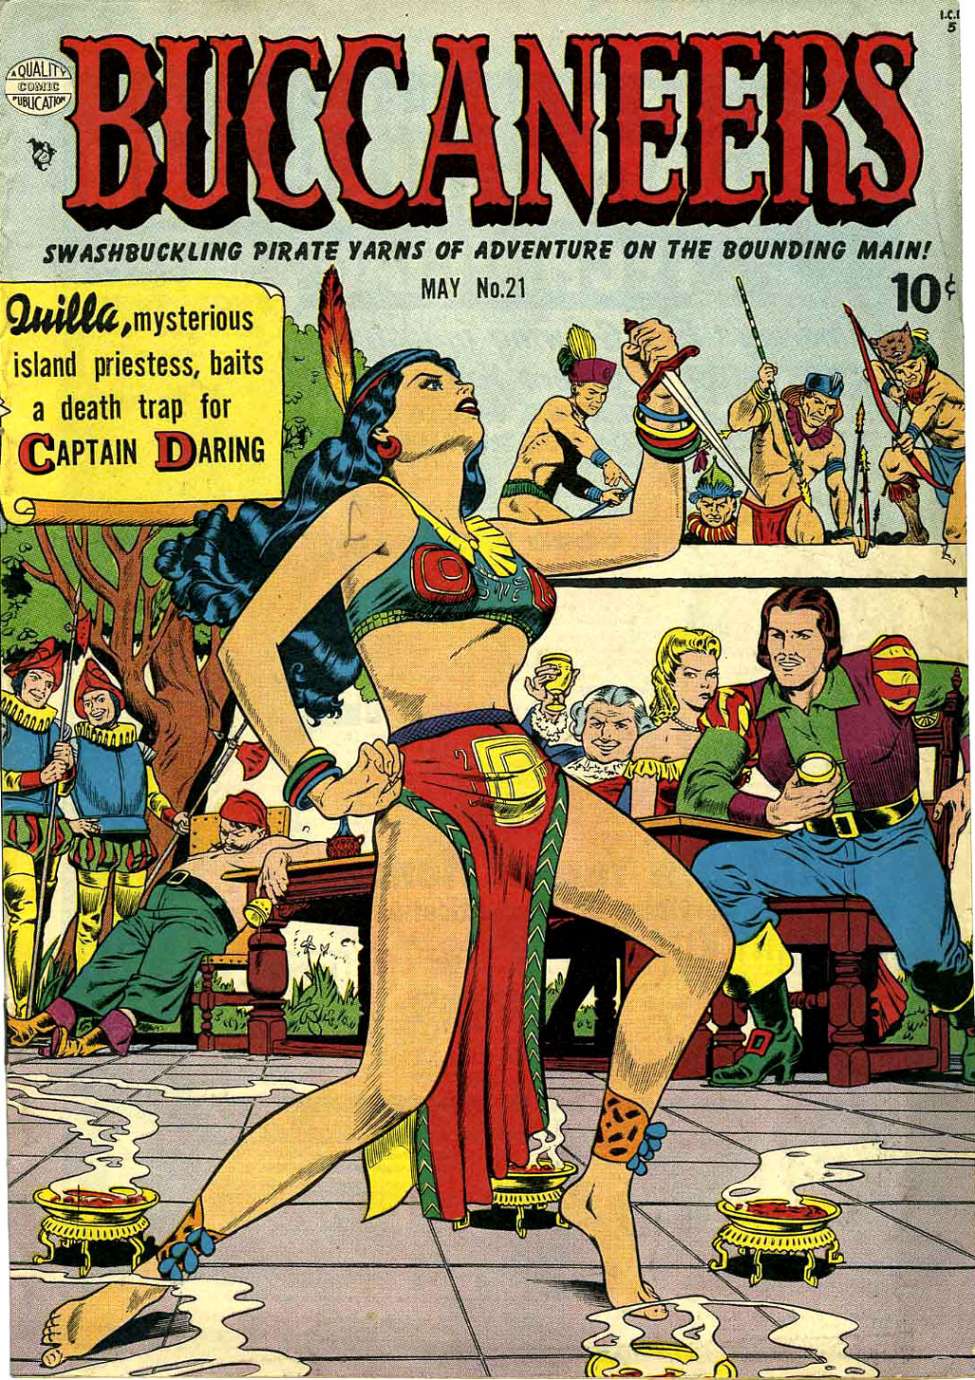 Comic Book Cover For Buccaneers 21 (Can ed) - Version 2